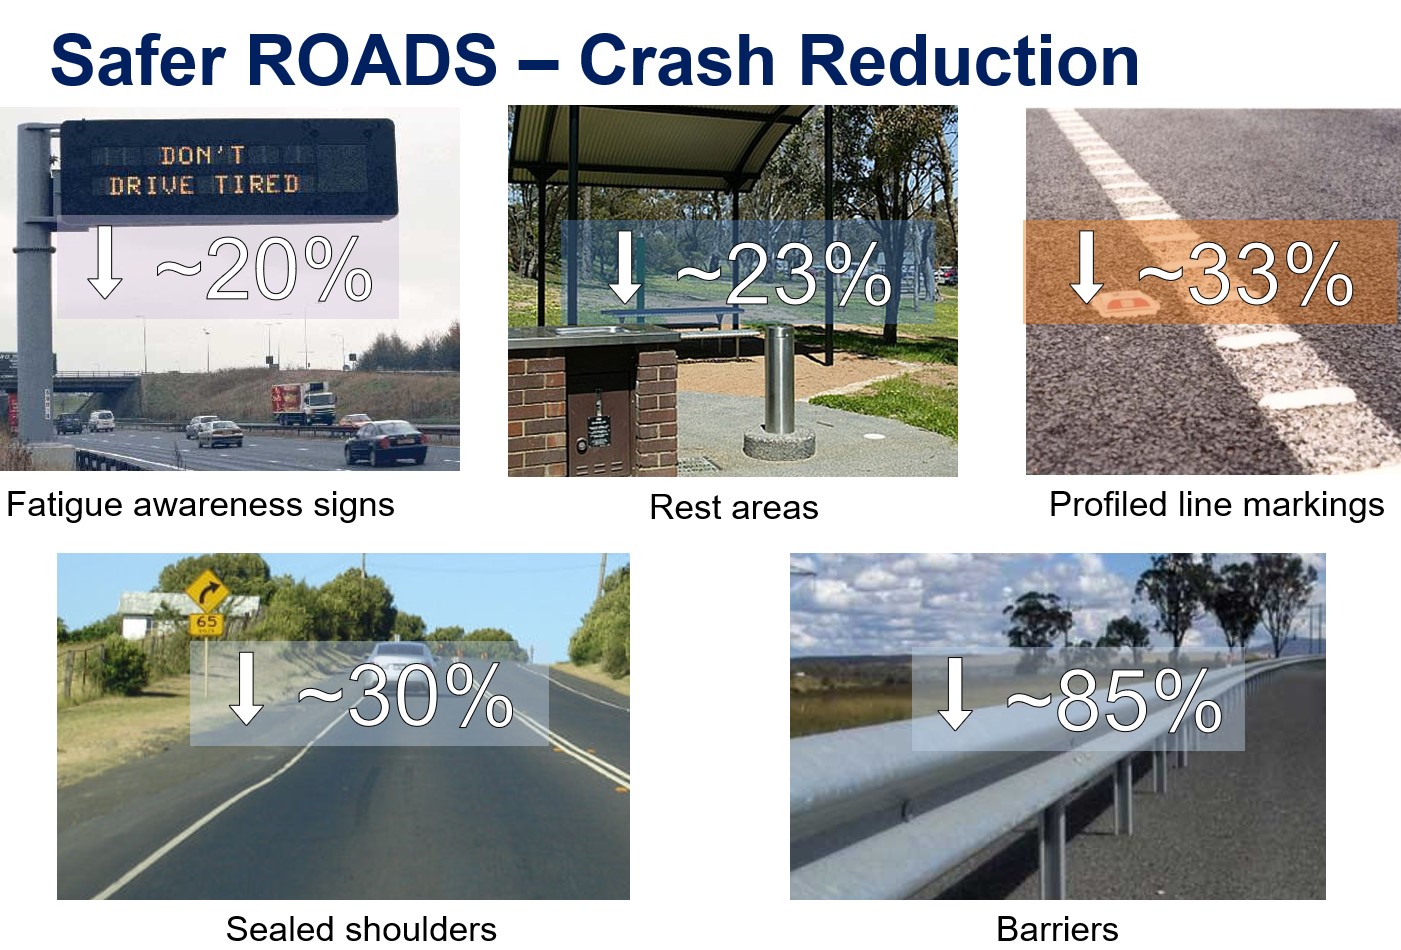 Estimated crash reductions from various fatigue measures